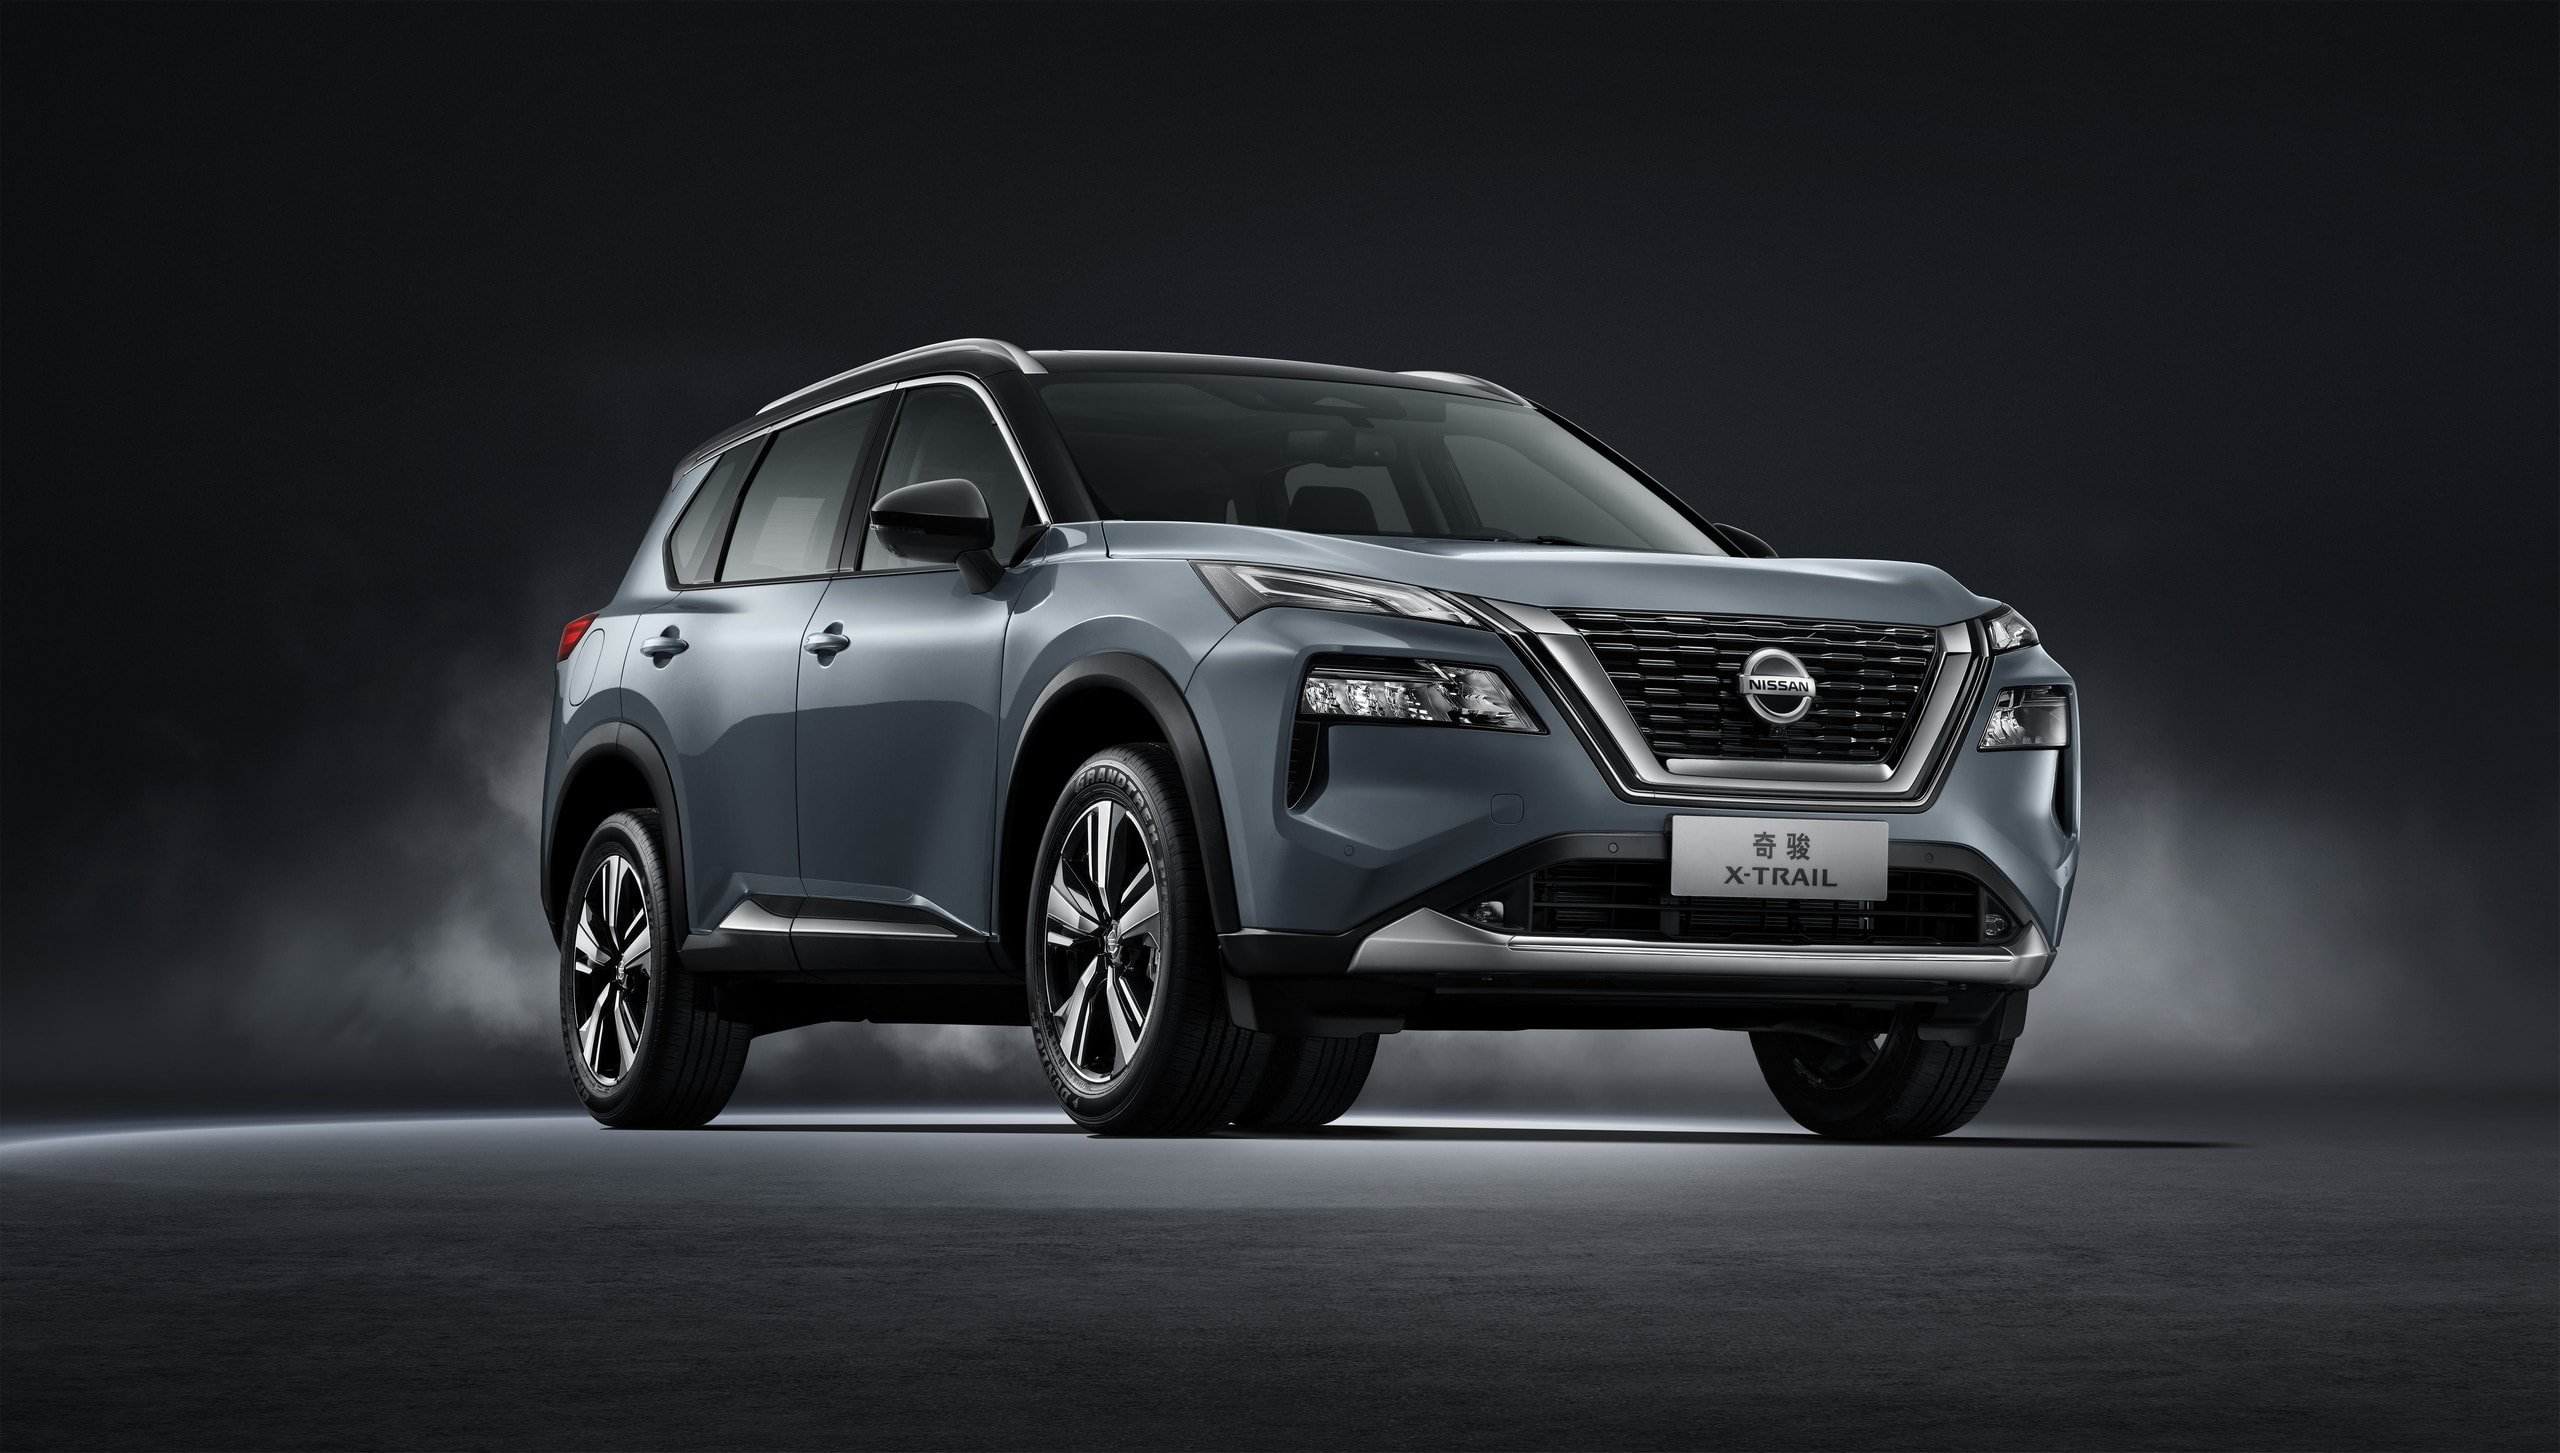 New Nissan XTrail to Arrive in 2022 in Europe with EPower Technology